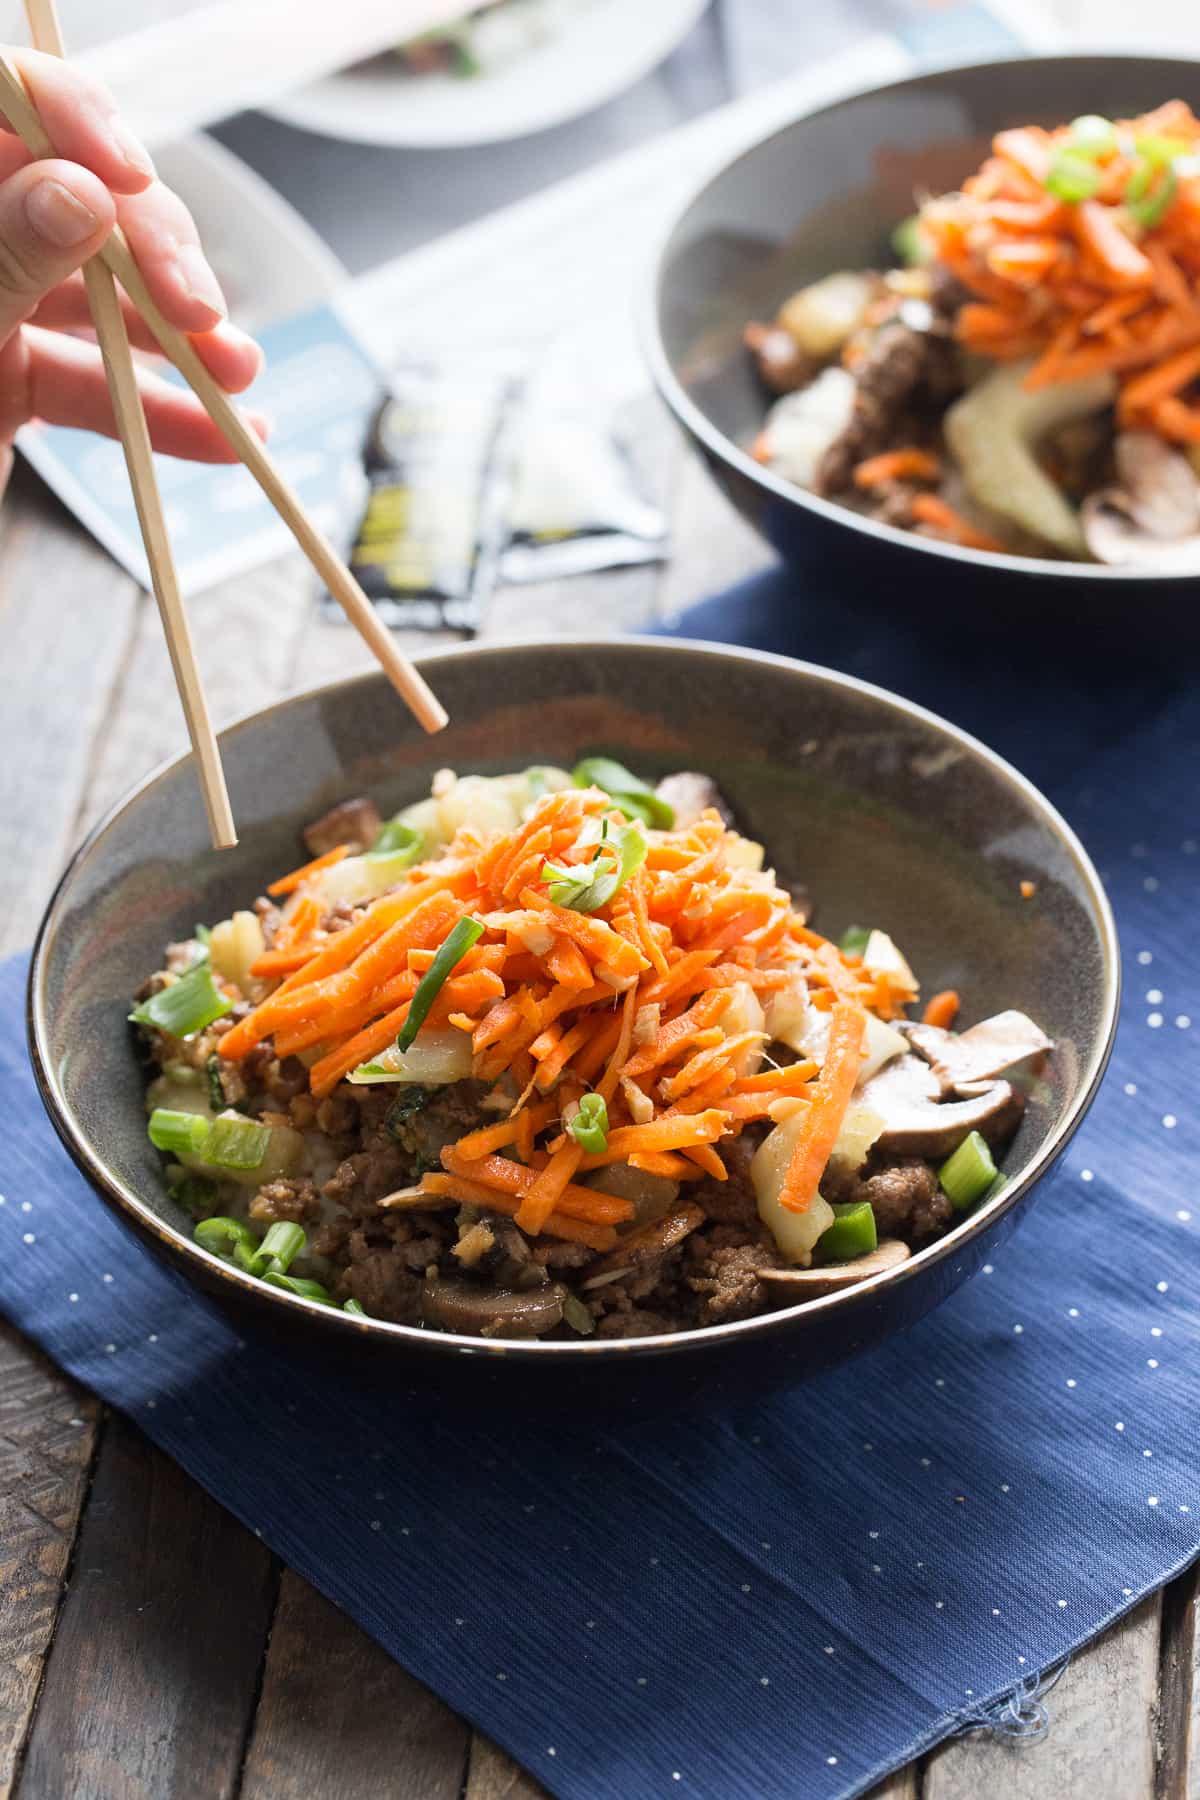 These beef bowls are made simply with Kroger new Prep and Pared meal kits!